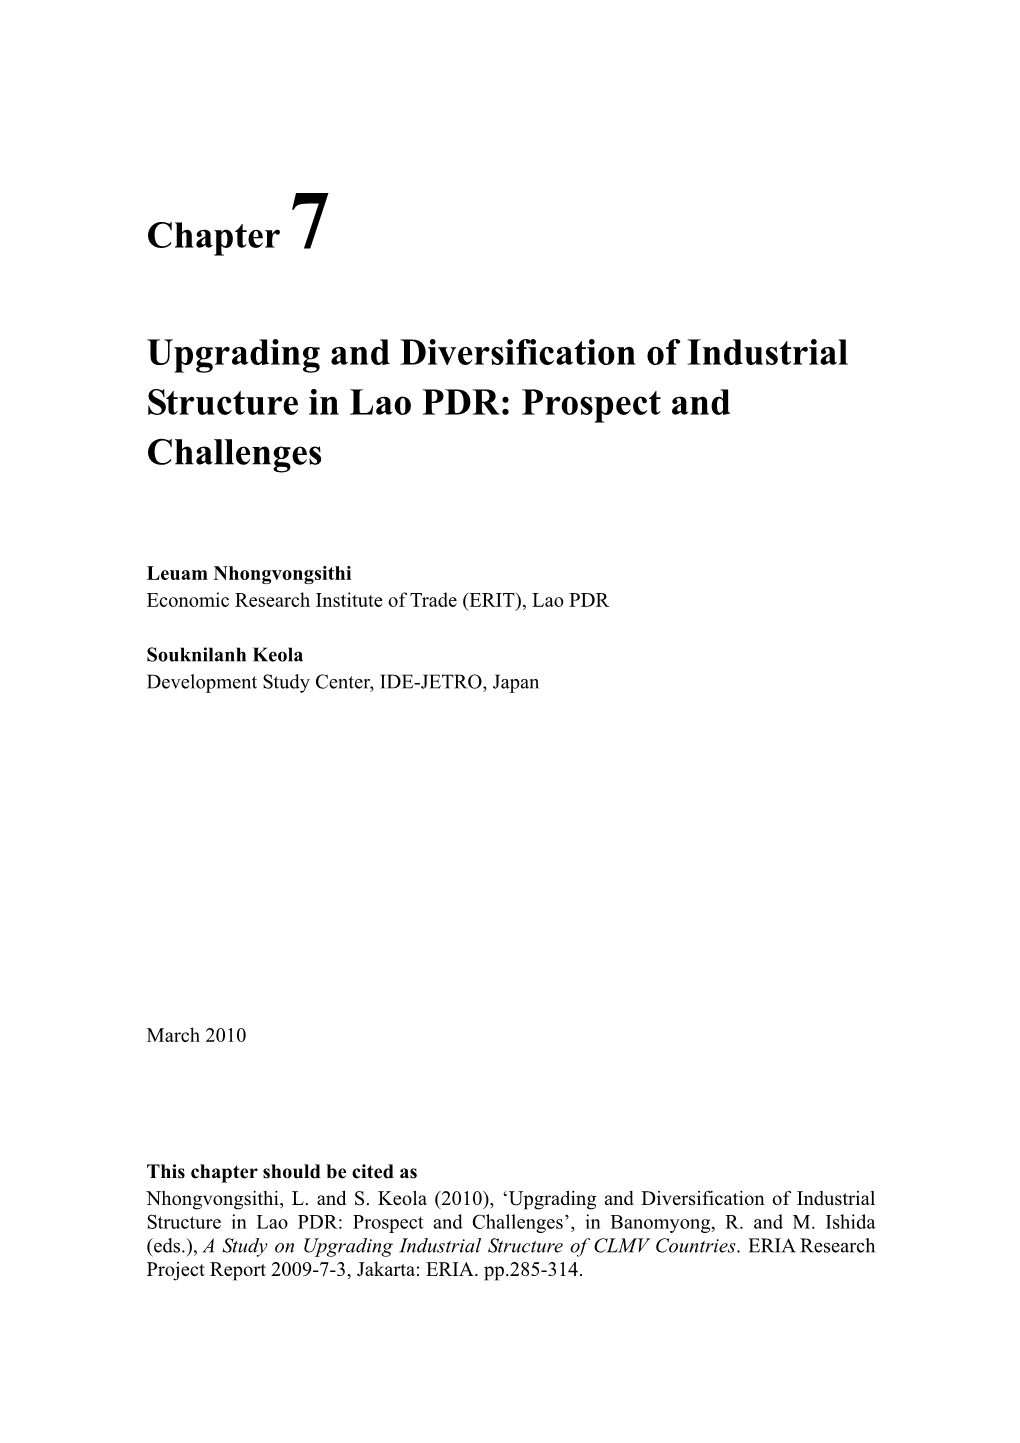 Chapter 7 Upgrading and Diversification of Industrial Structure